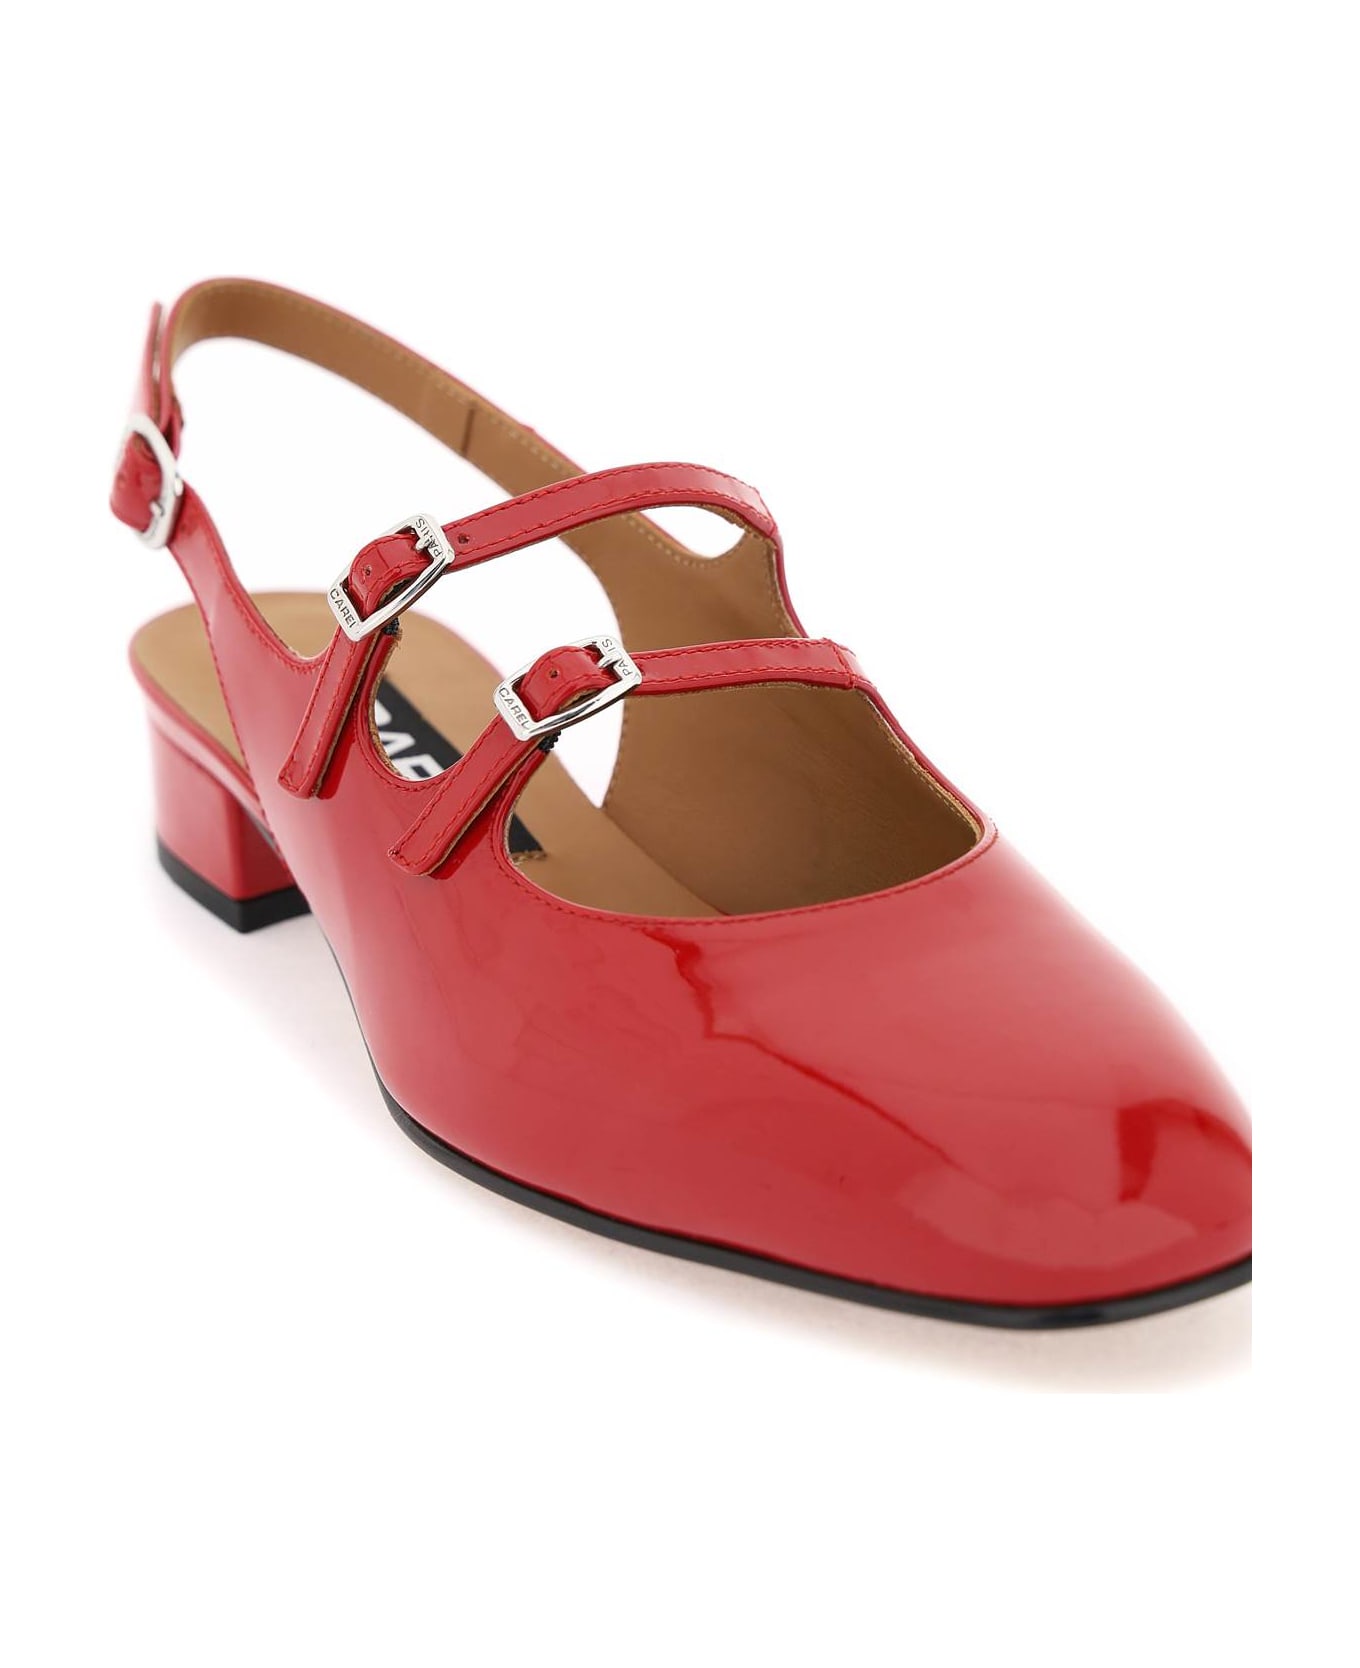 Carel Patent Leather Pêche Slingback Mary Jane - ROUGE (Red) ハイヒール